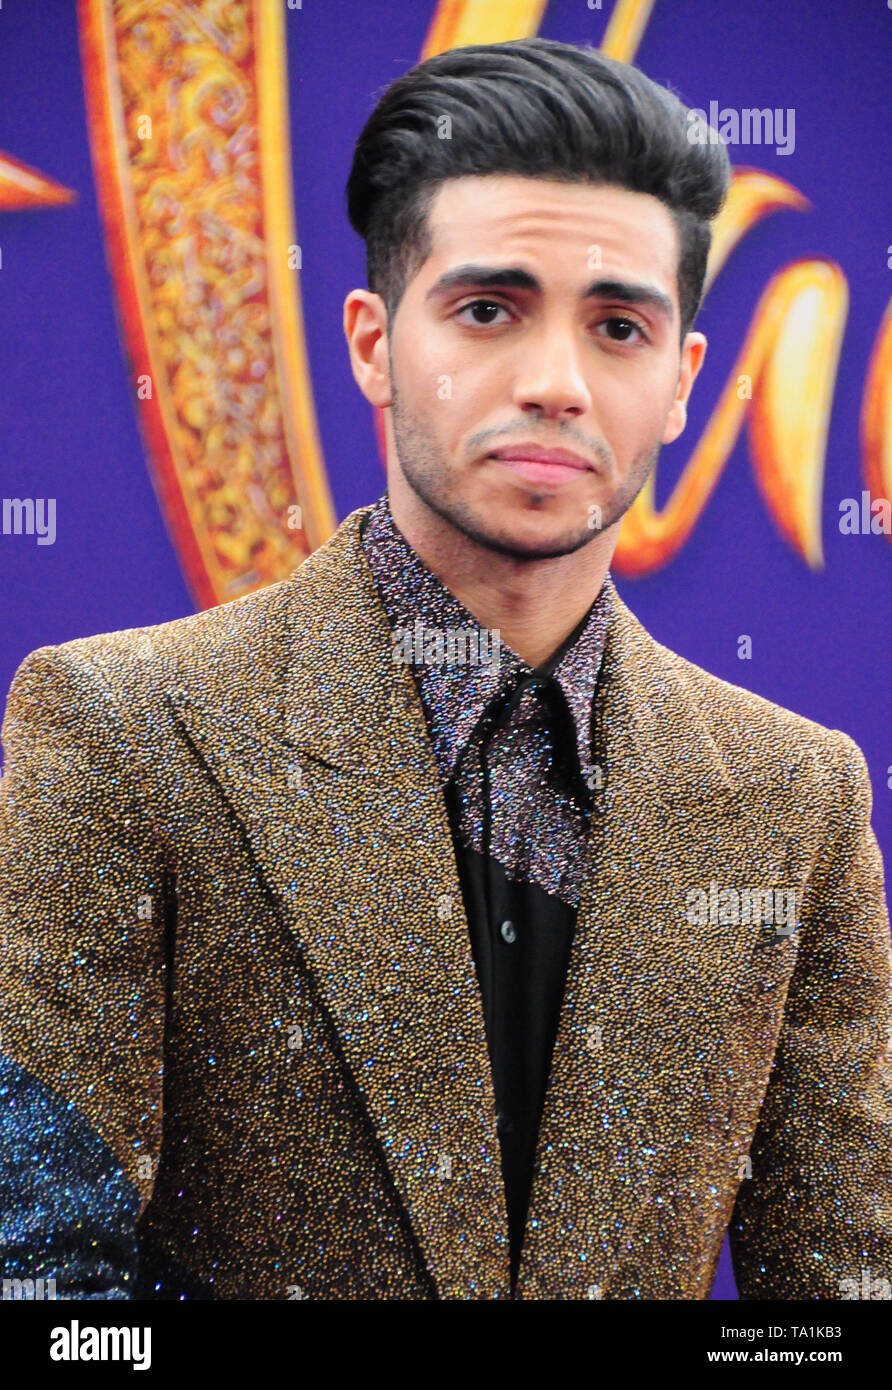 Hollywood, California, USA 21st May 2019 Actor Mena Massoud attends the  Disney Premiere of 'Aladdin' on